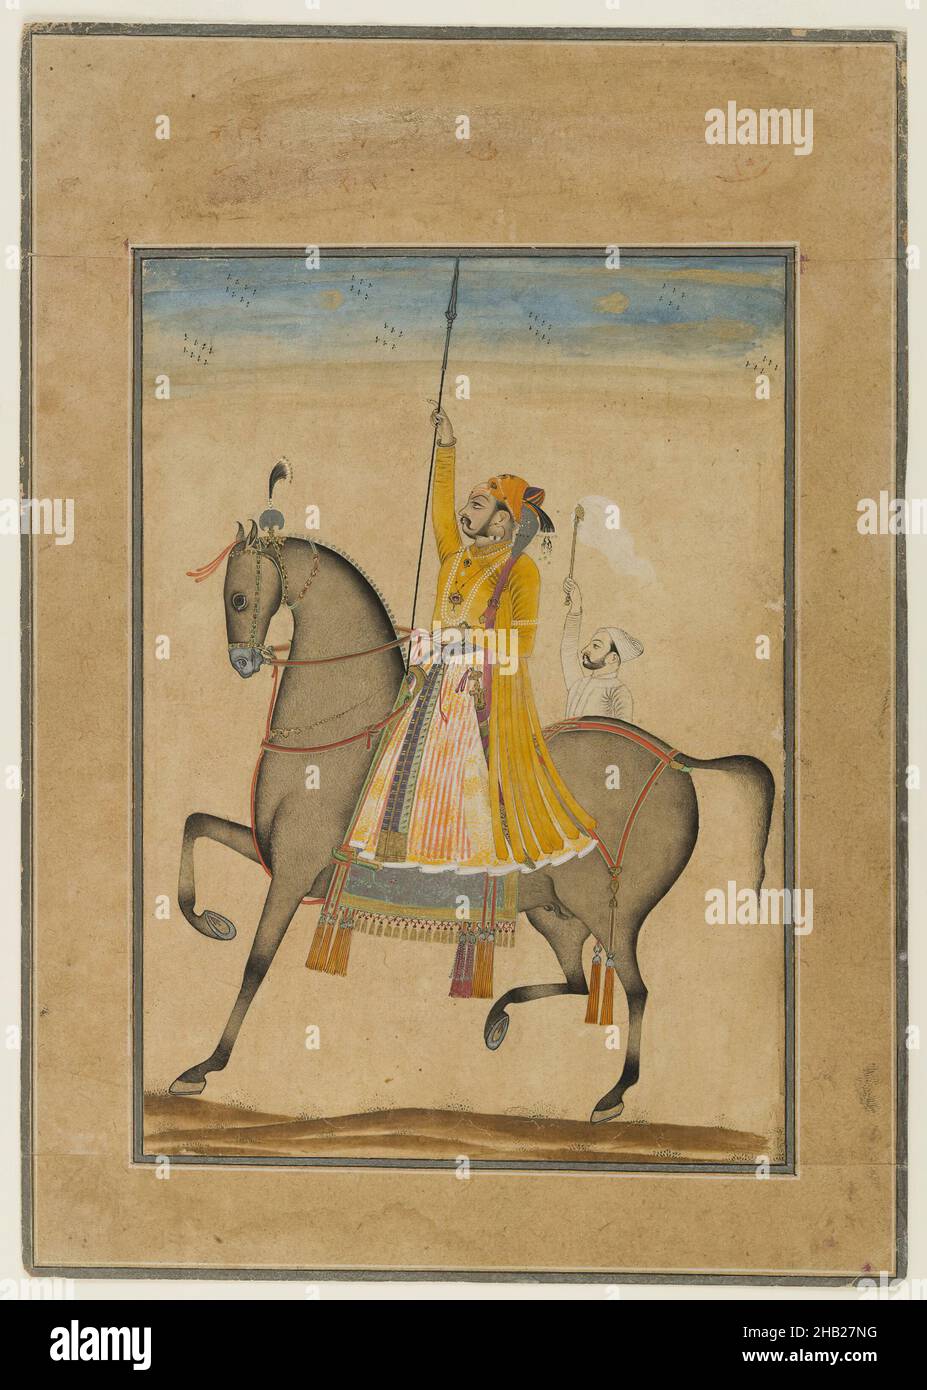 Equestrian Portrait of Maharaja Sujan Singh of Bikaner, Kasam, Son of Muhammad, Opaque watercolor, silver, and gold on paper, Rajasthan, India, ca. 1747, sheet: 11 1/2 x 8 1/8 in., 29.2 x 20.6 cm, Bikaner, Gold, horse, Kasam, Maharaja Sujan Singh, Paper, Portrait, Rajasthan, Silver, Sword, Watercolor Stock Photo